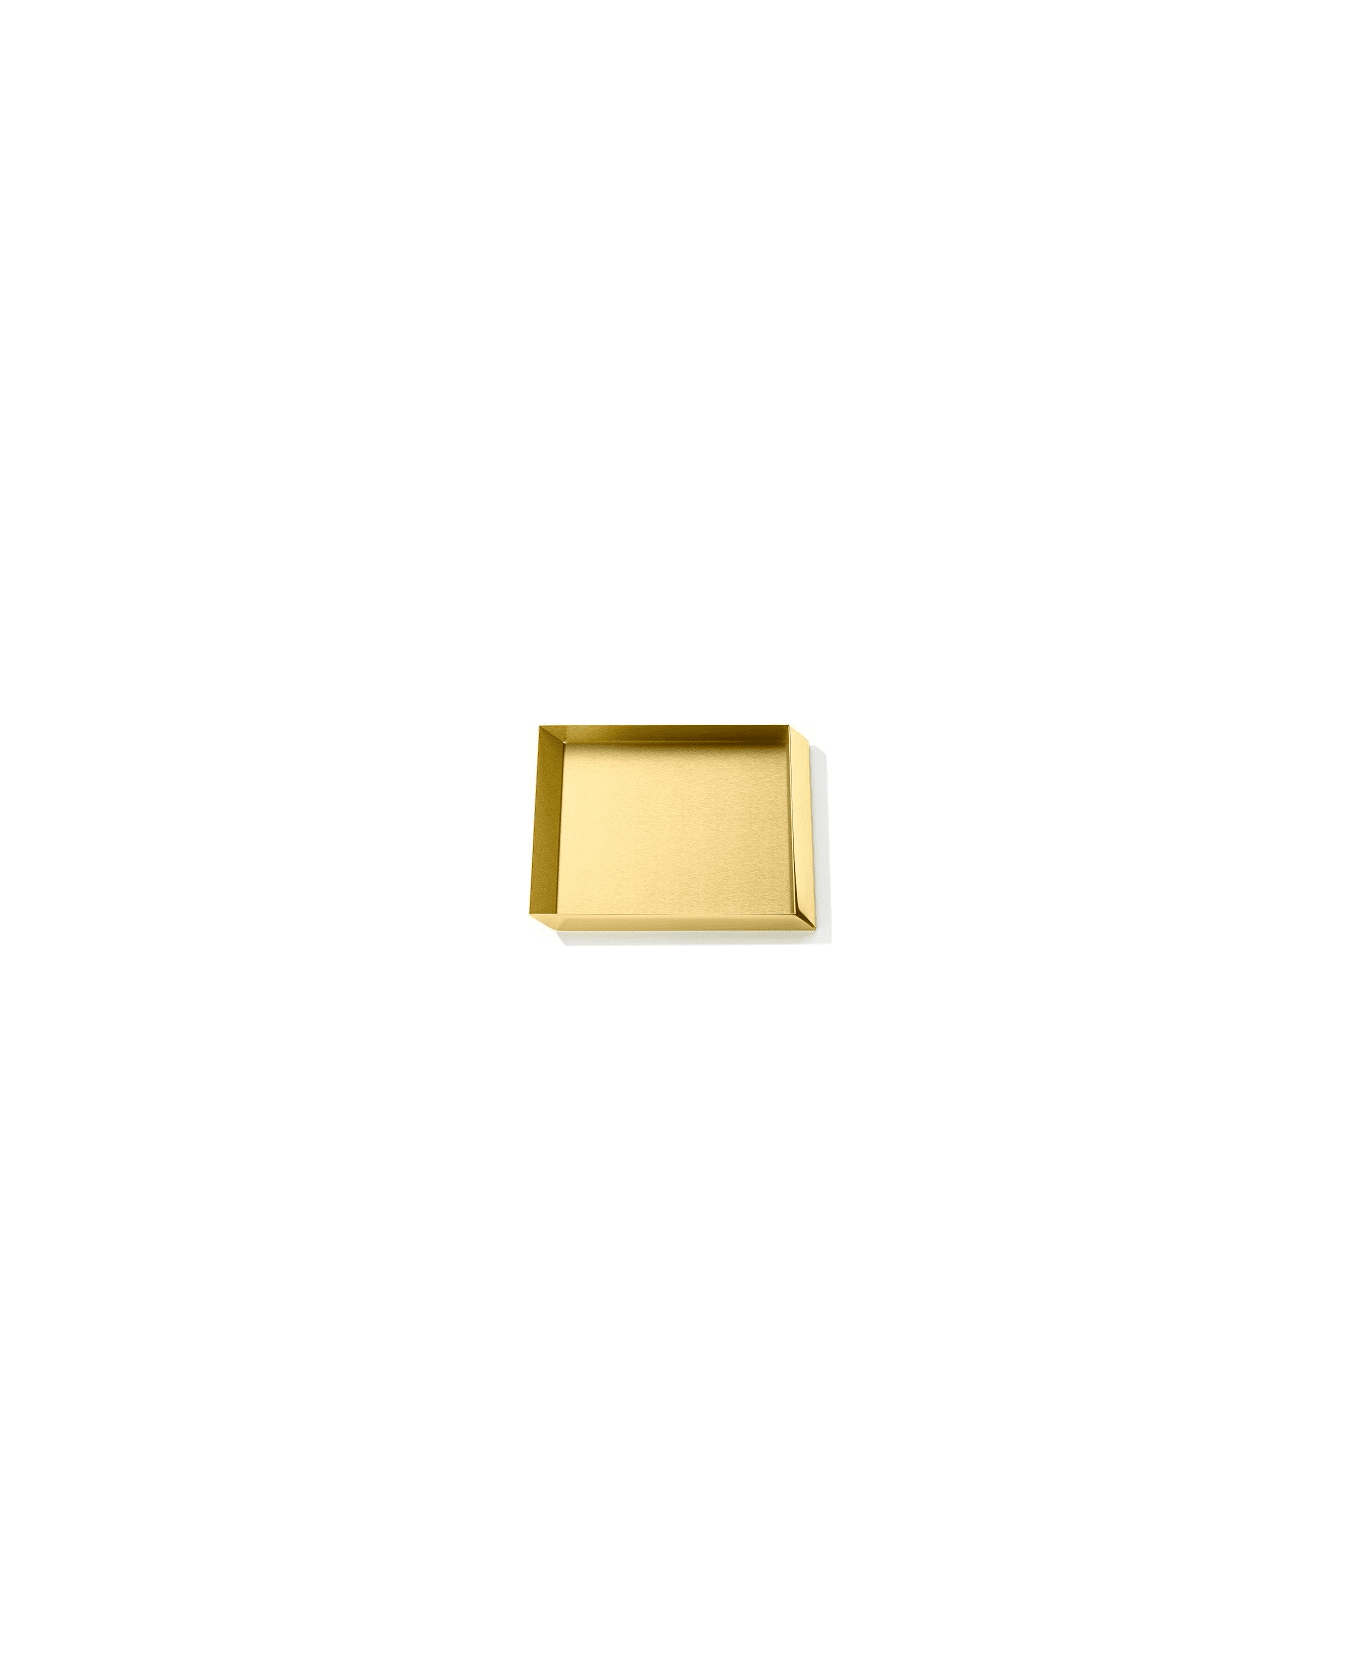 Ghidini 1961 Axonometry - Squared Small Tray Polished Brass - Polished brass